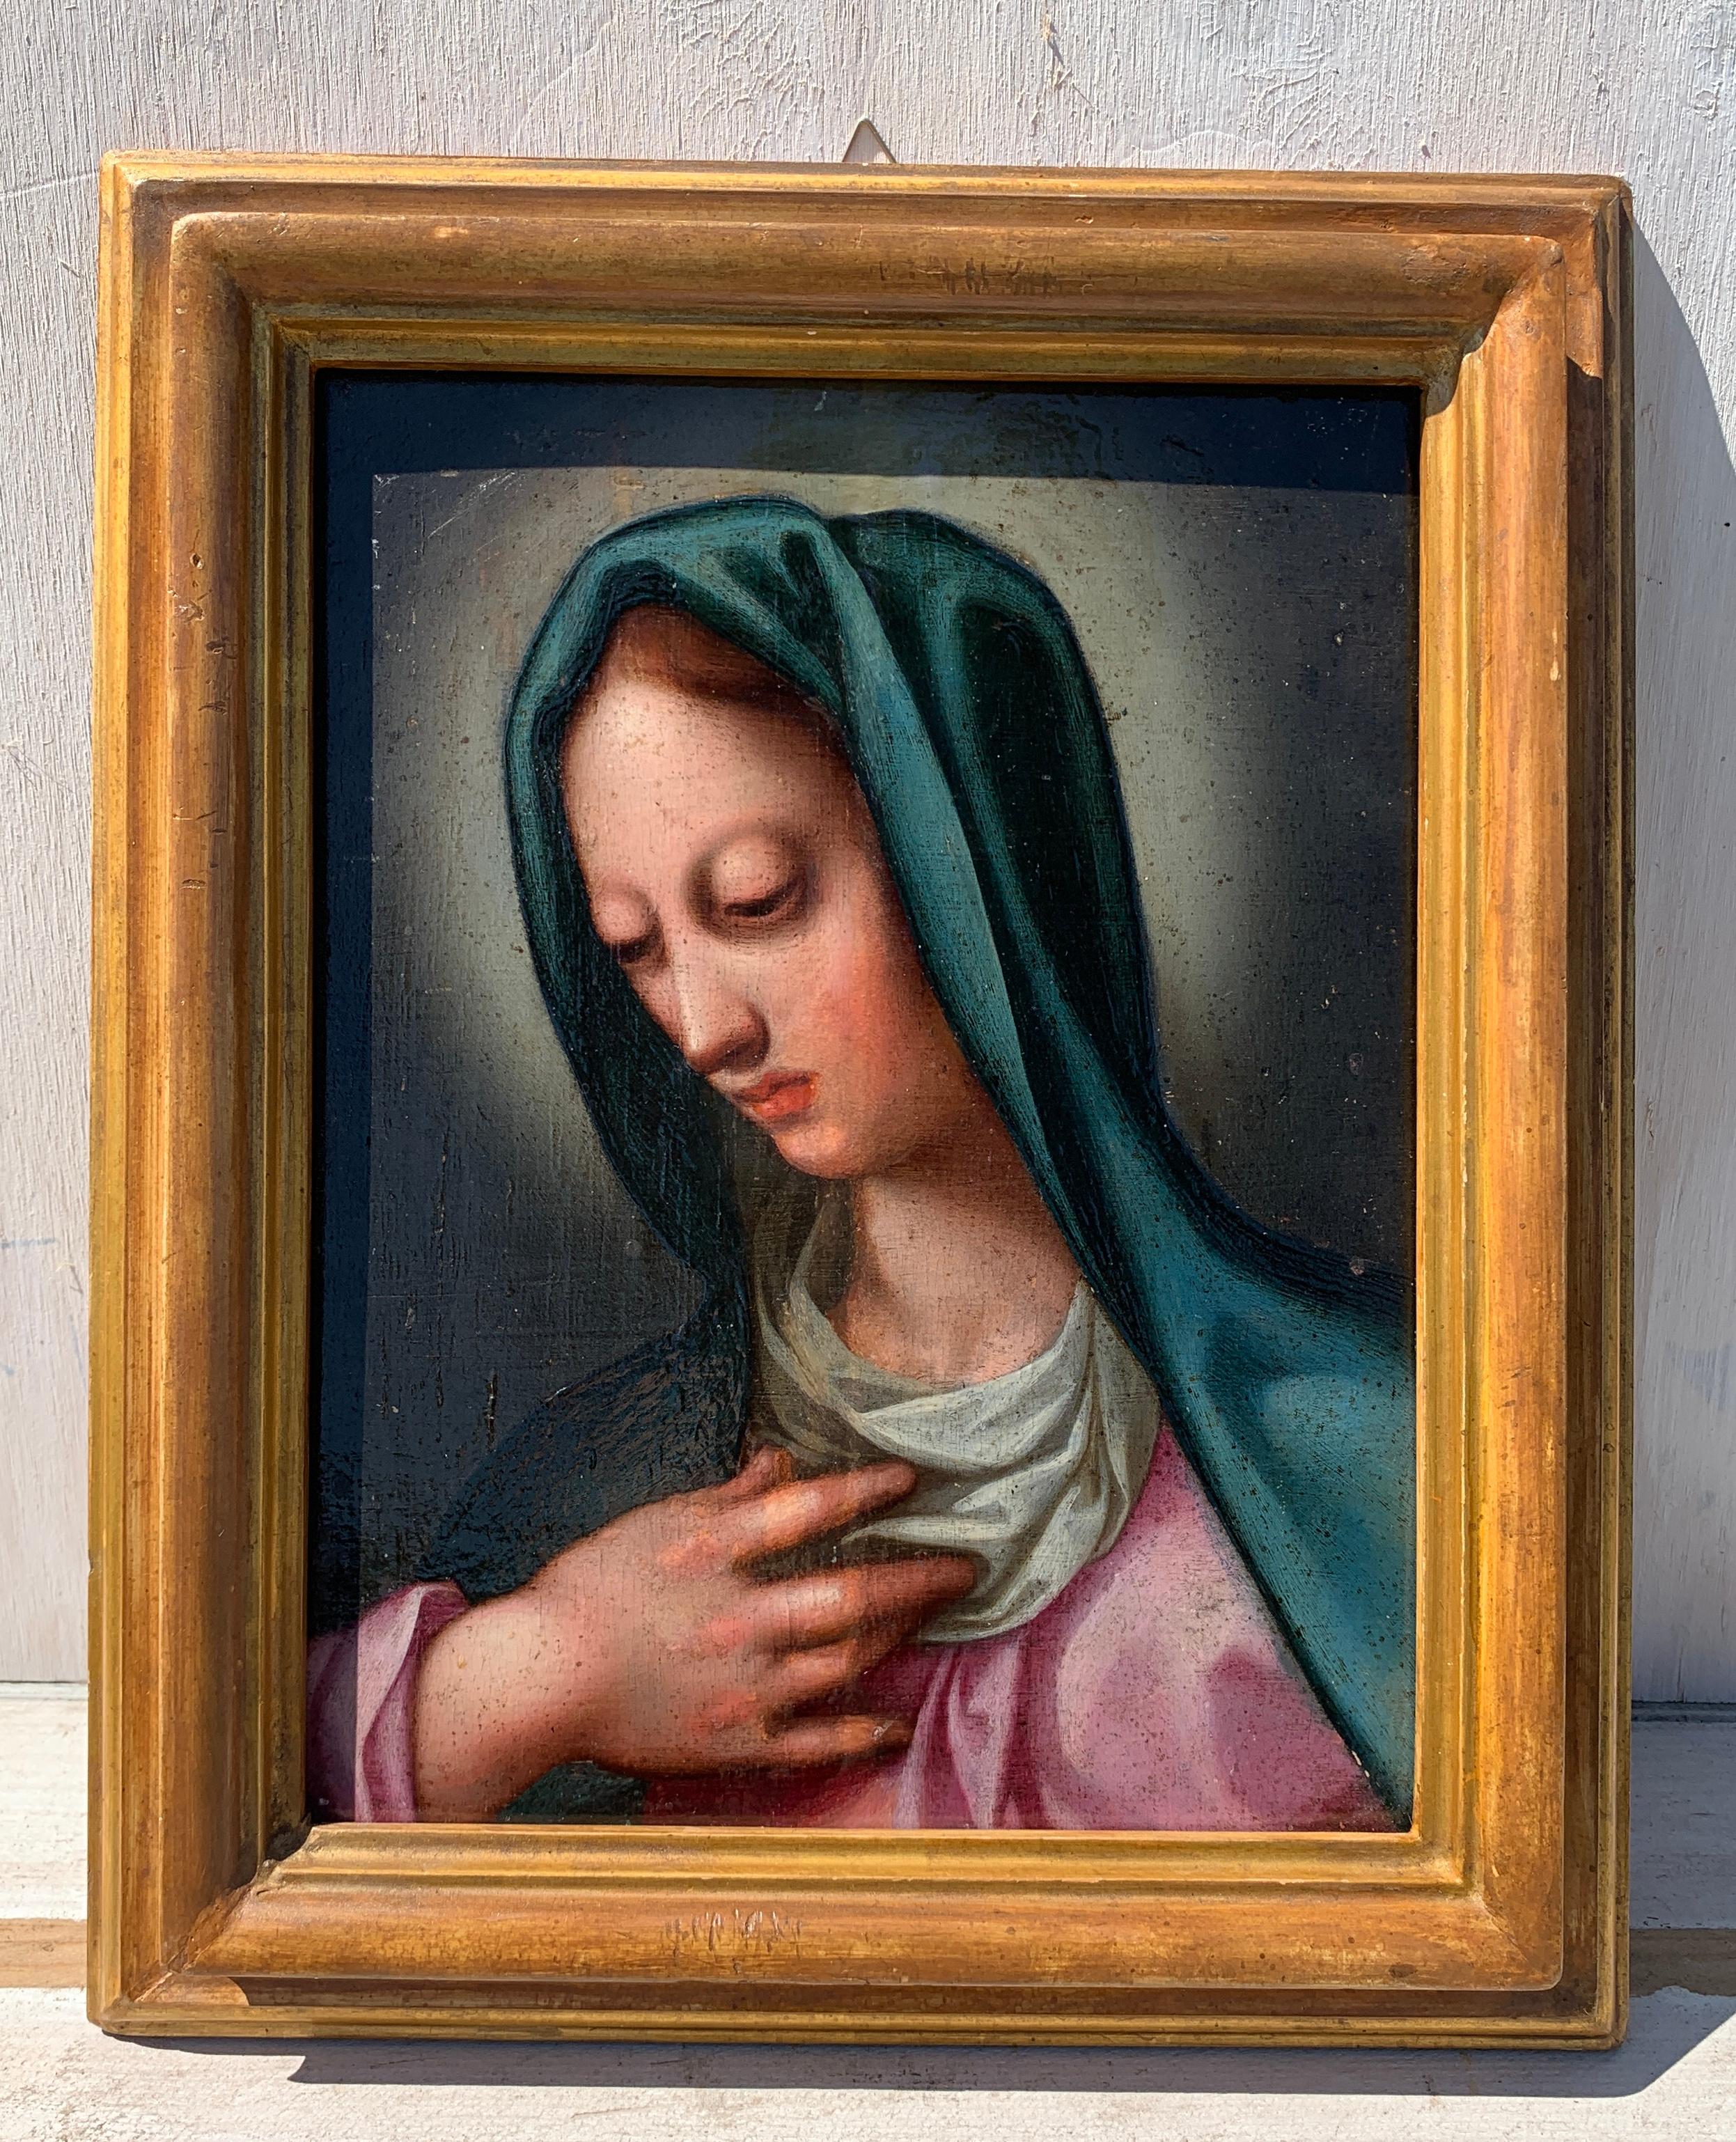 Baroque Italian painter- 17th century figure painting - Virgin - Oil on panel - Painting by Unknown